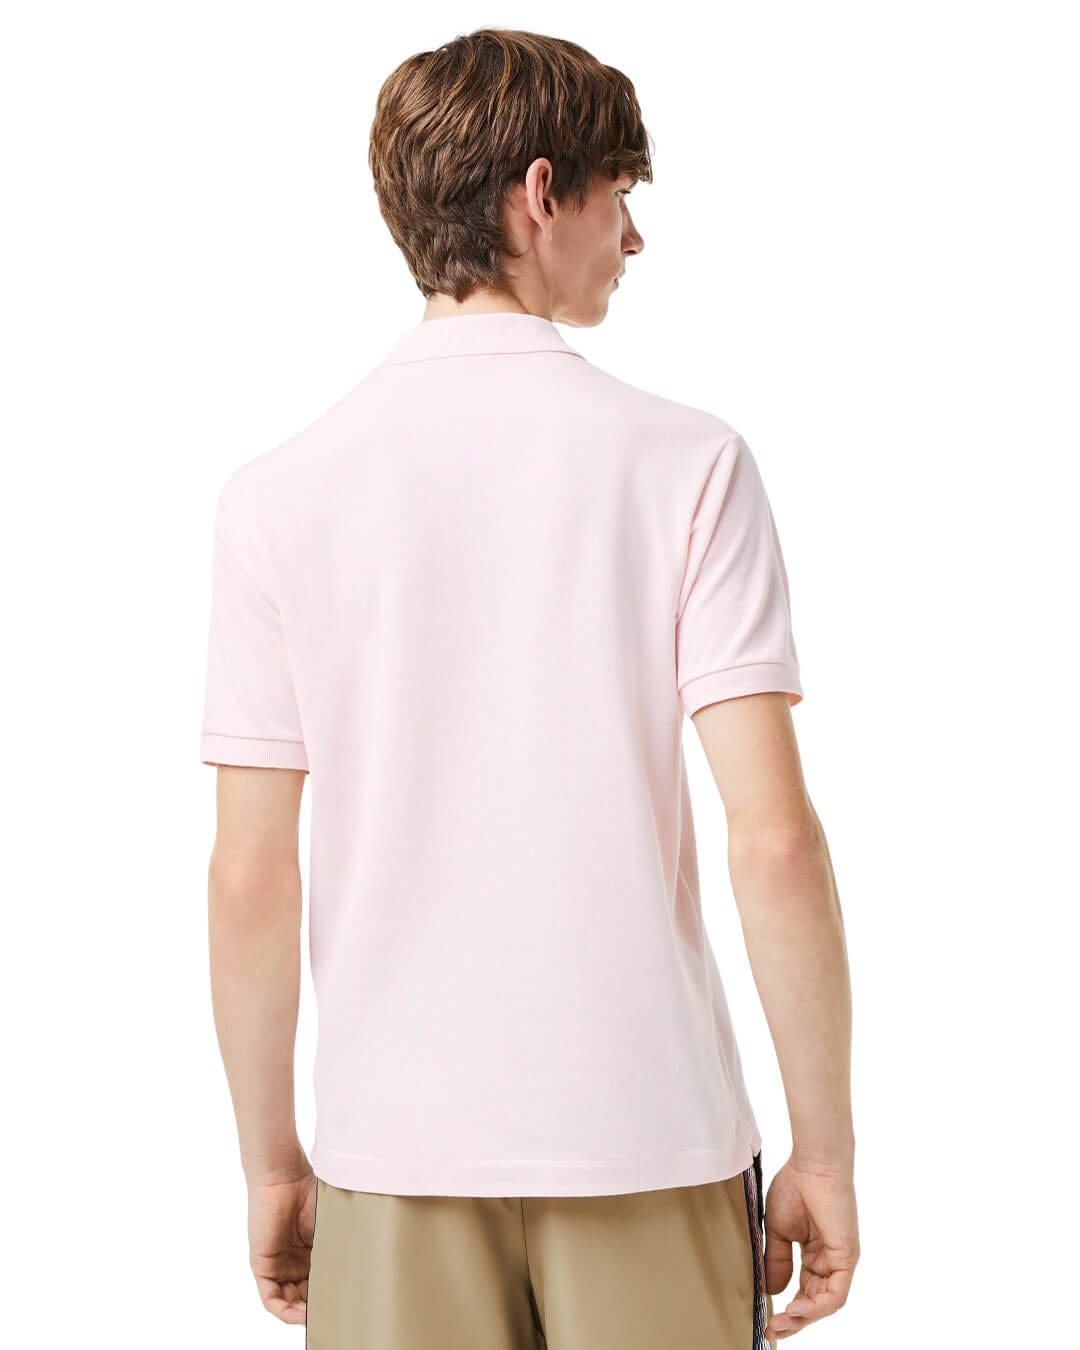 Lacoste Polo Shirts Lacoste Classic Fit L.12.12 Pink Polo Shirt